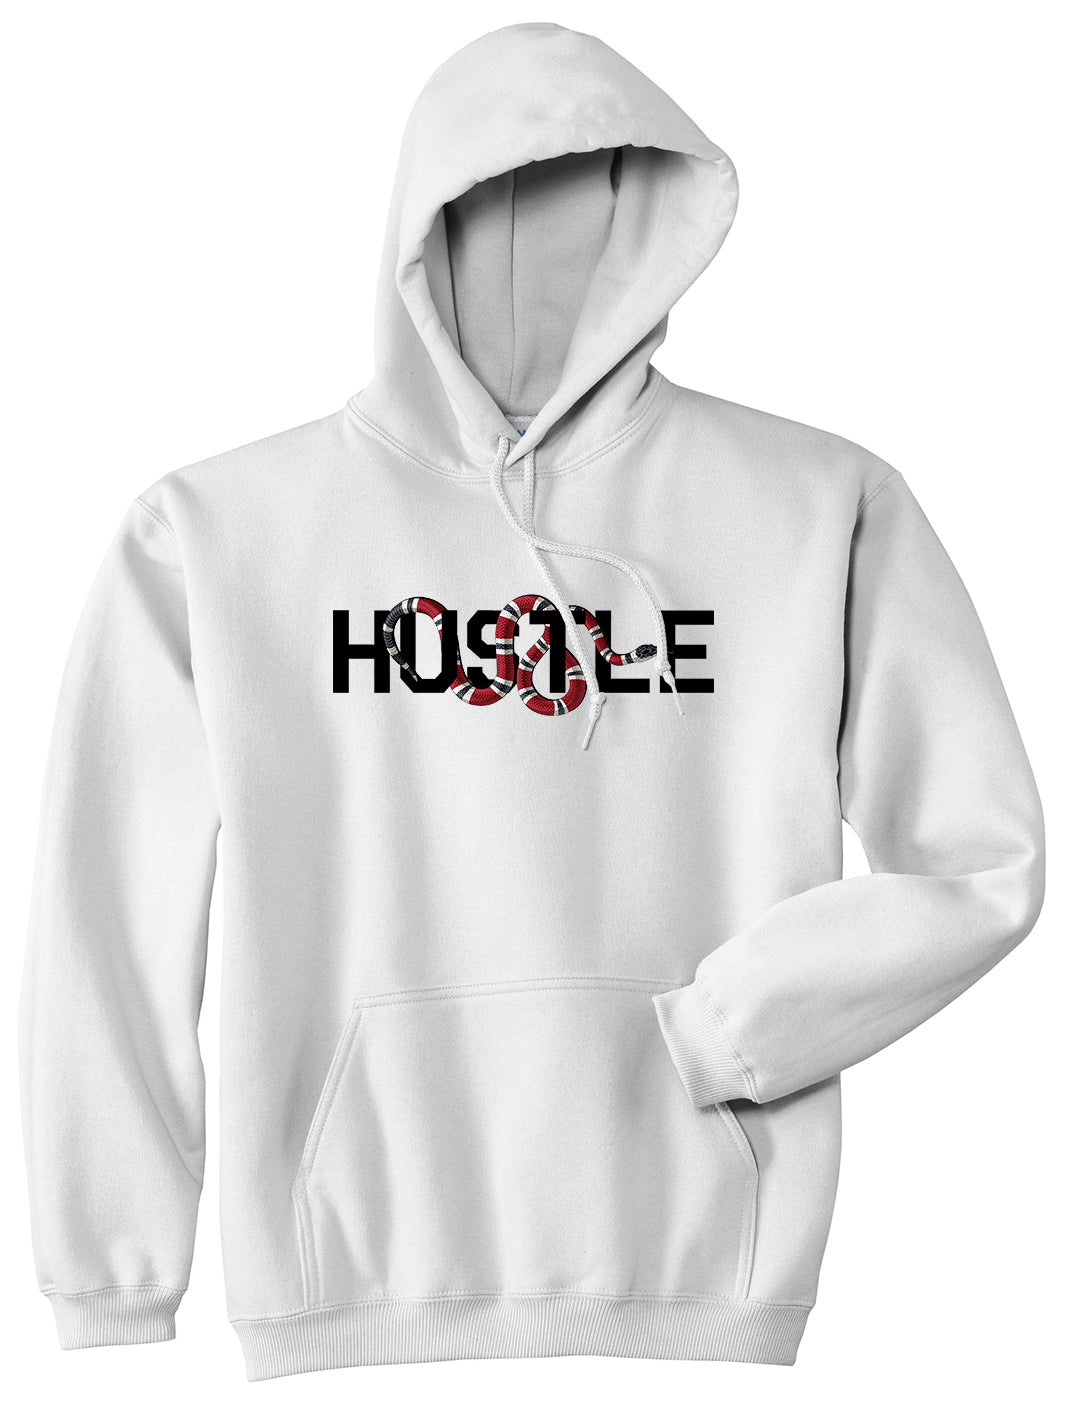 Hustle Snake Mens Pullover Hoodie White by Kings Of NY